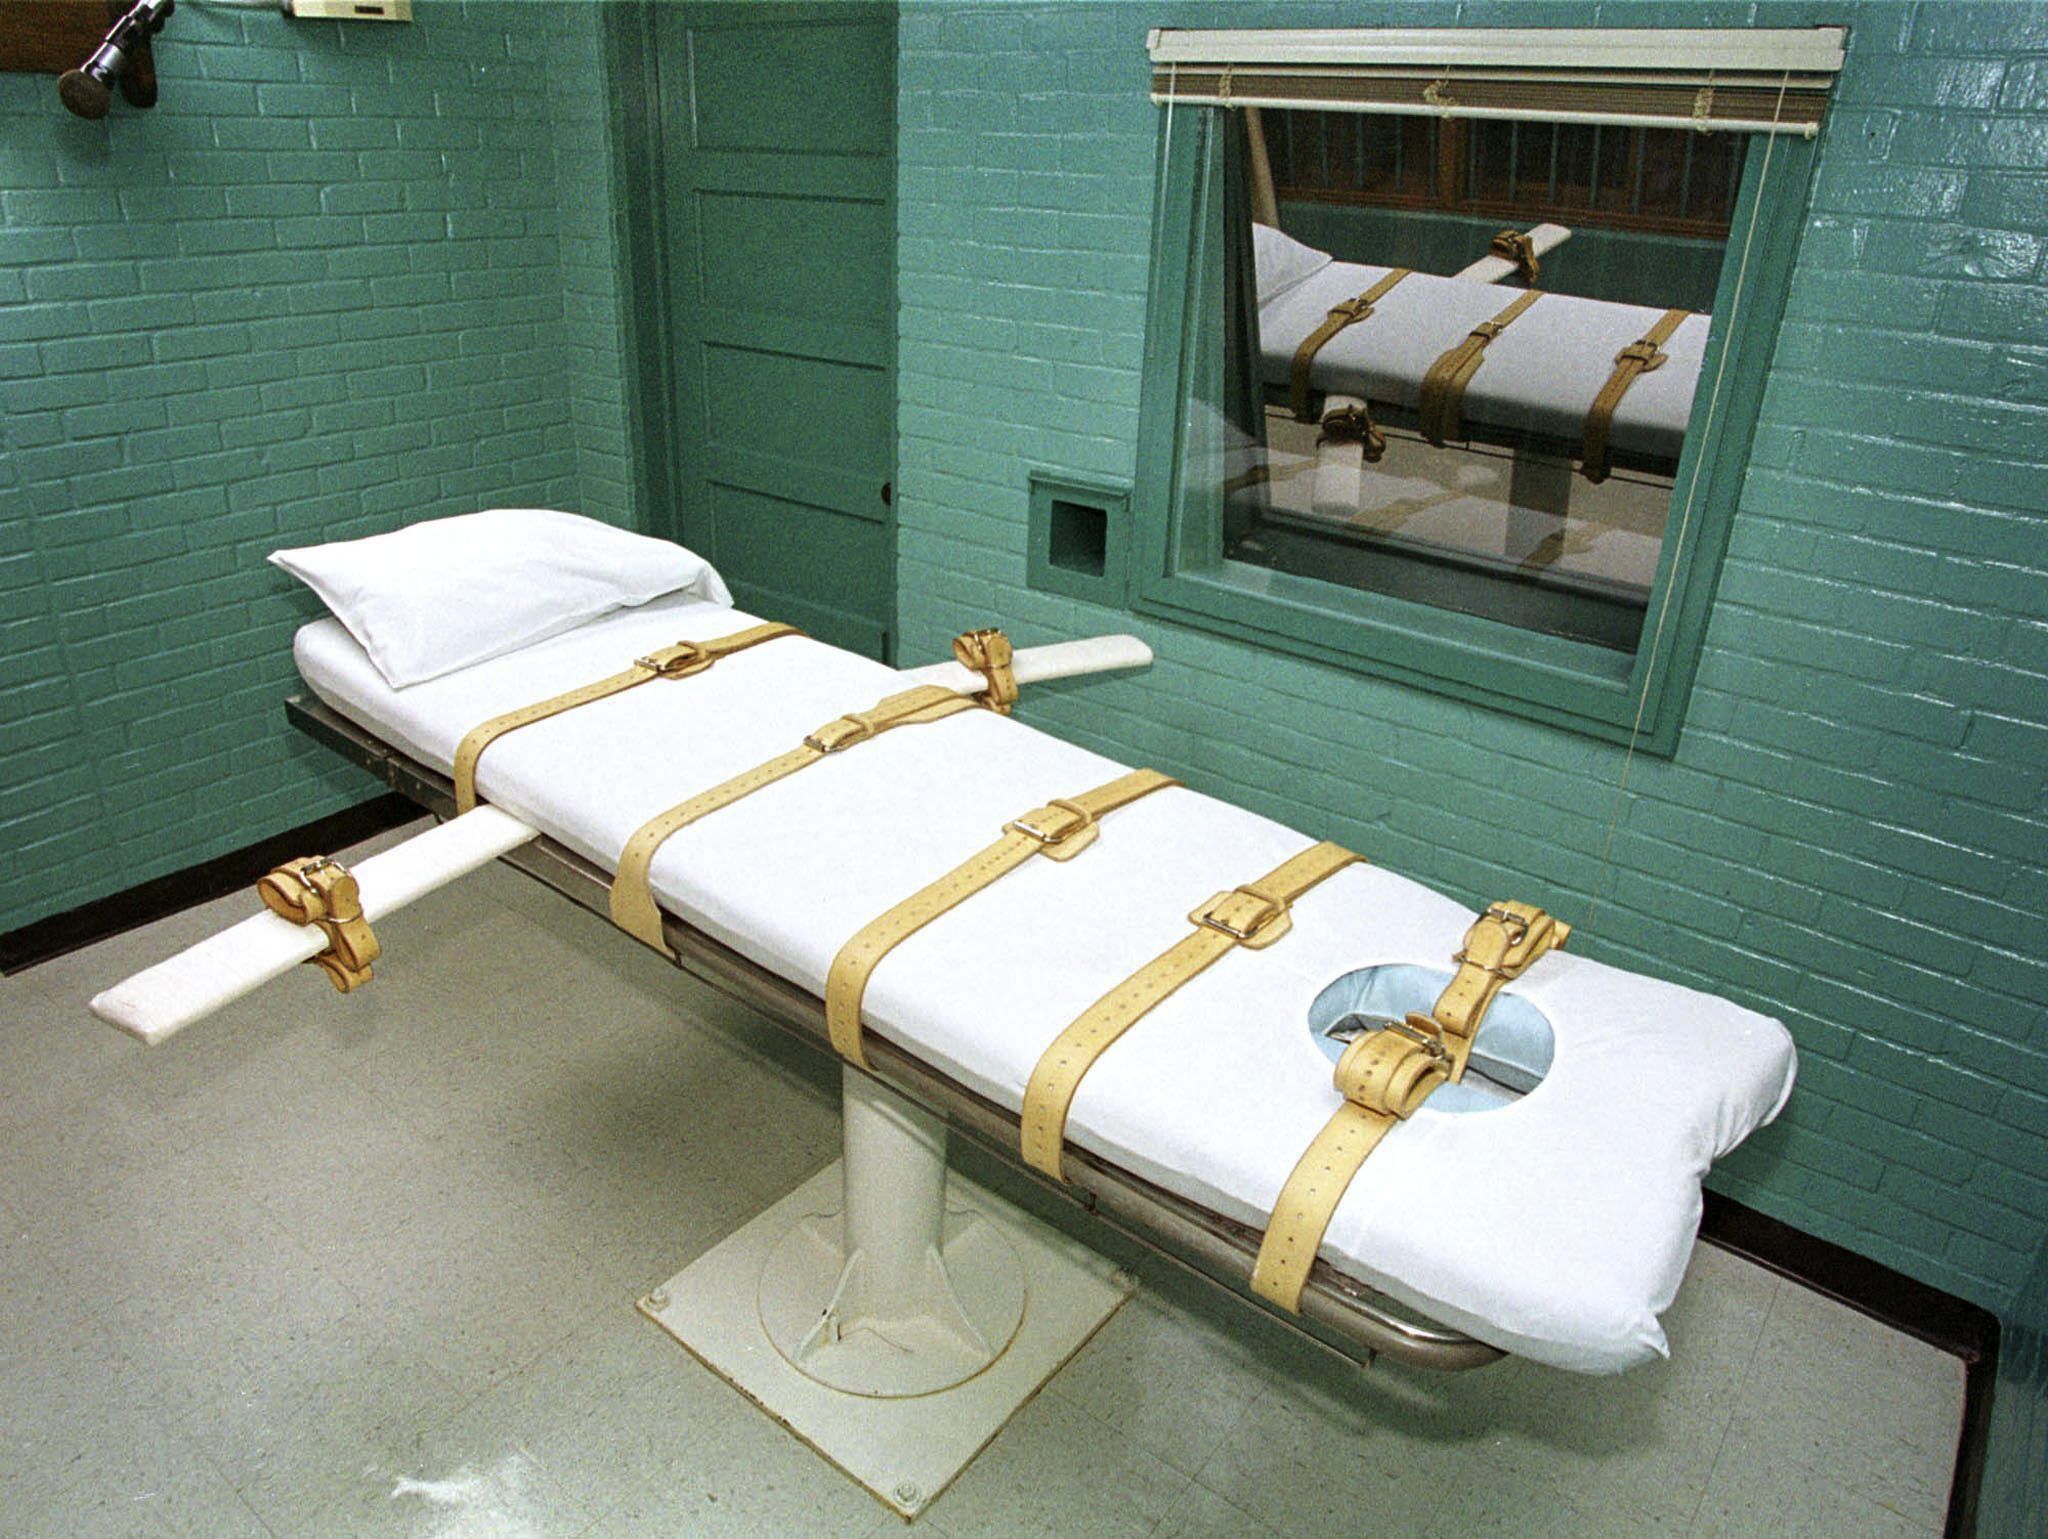 A confessed serial killer convicted of the death of his wife and another woman has been executed by lethal injection in the state of Florida.  (EFE)